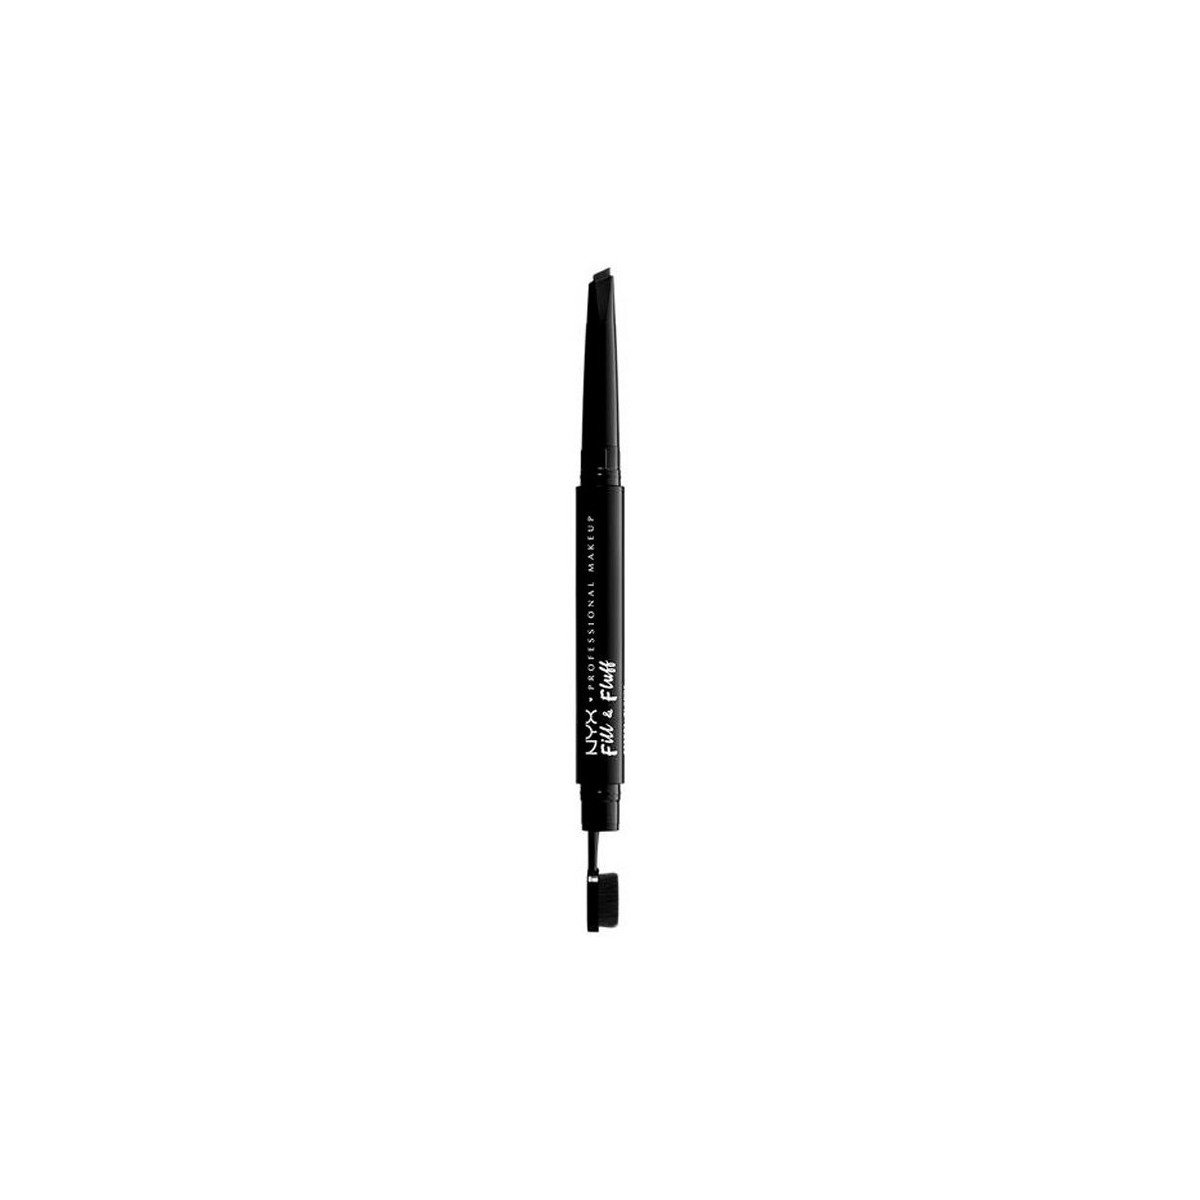 Beauté Femme Maquillage Sourcils Nyx Professional Make Up Fill & Fluff Eyebrow Pomade Pencil black 